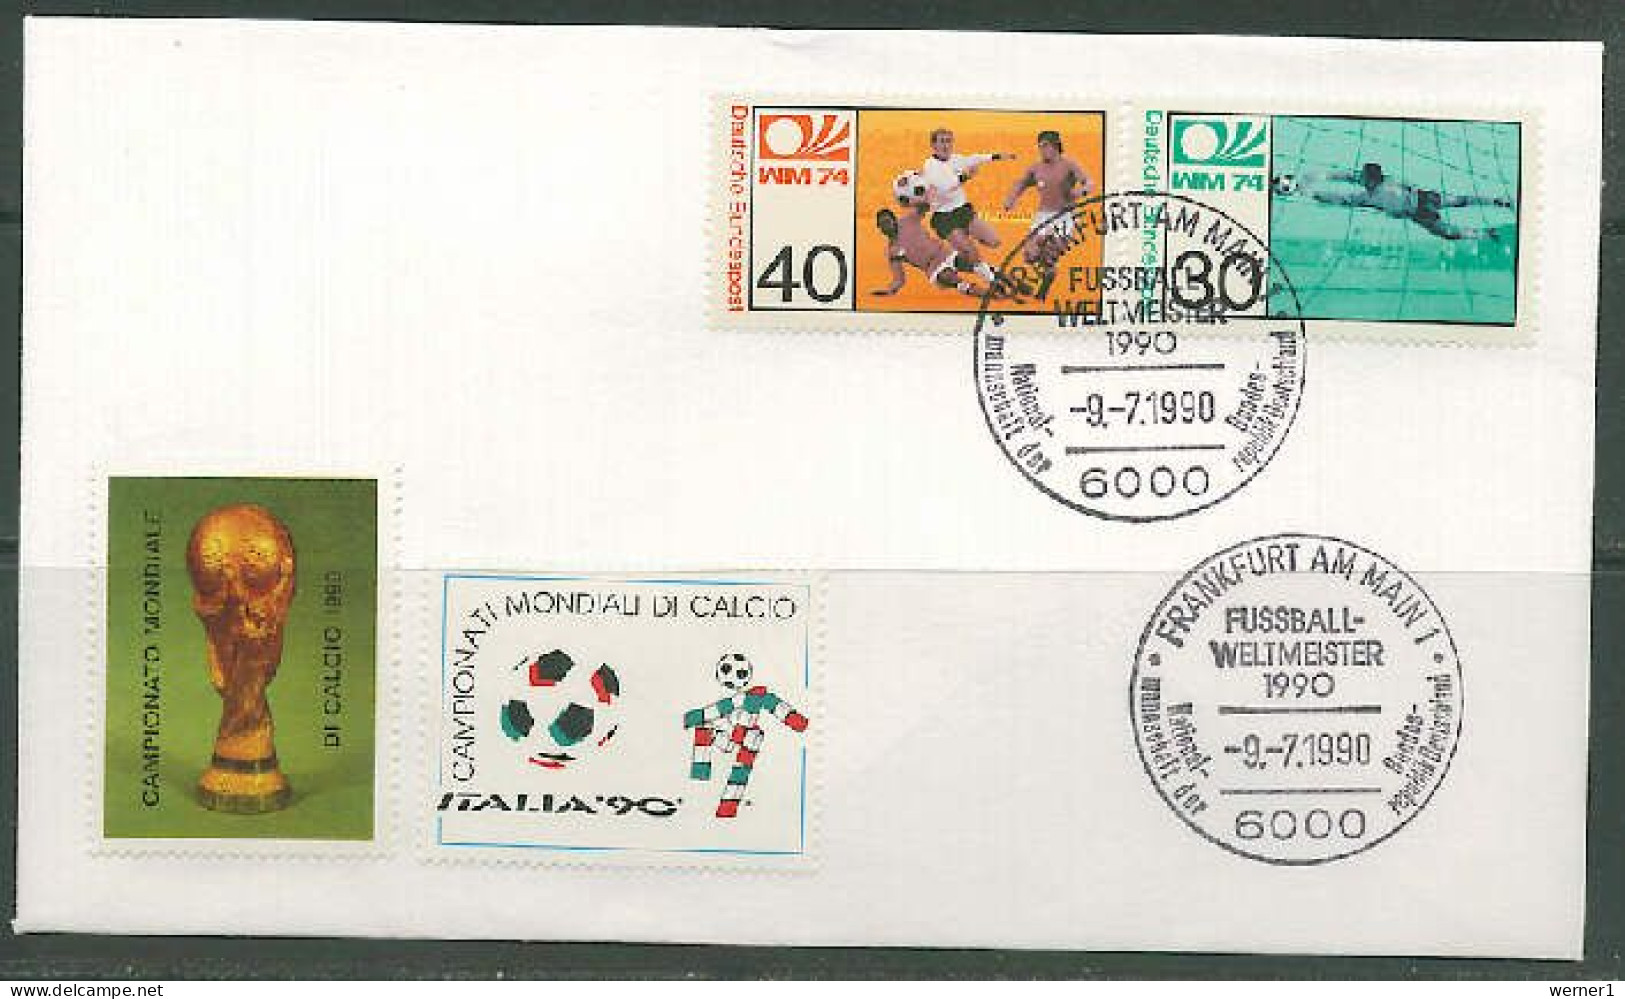 Germany 1990 Football Soccer World Cup Commemorative Cover, Germany World Cup Champion - 1990 – Italy